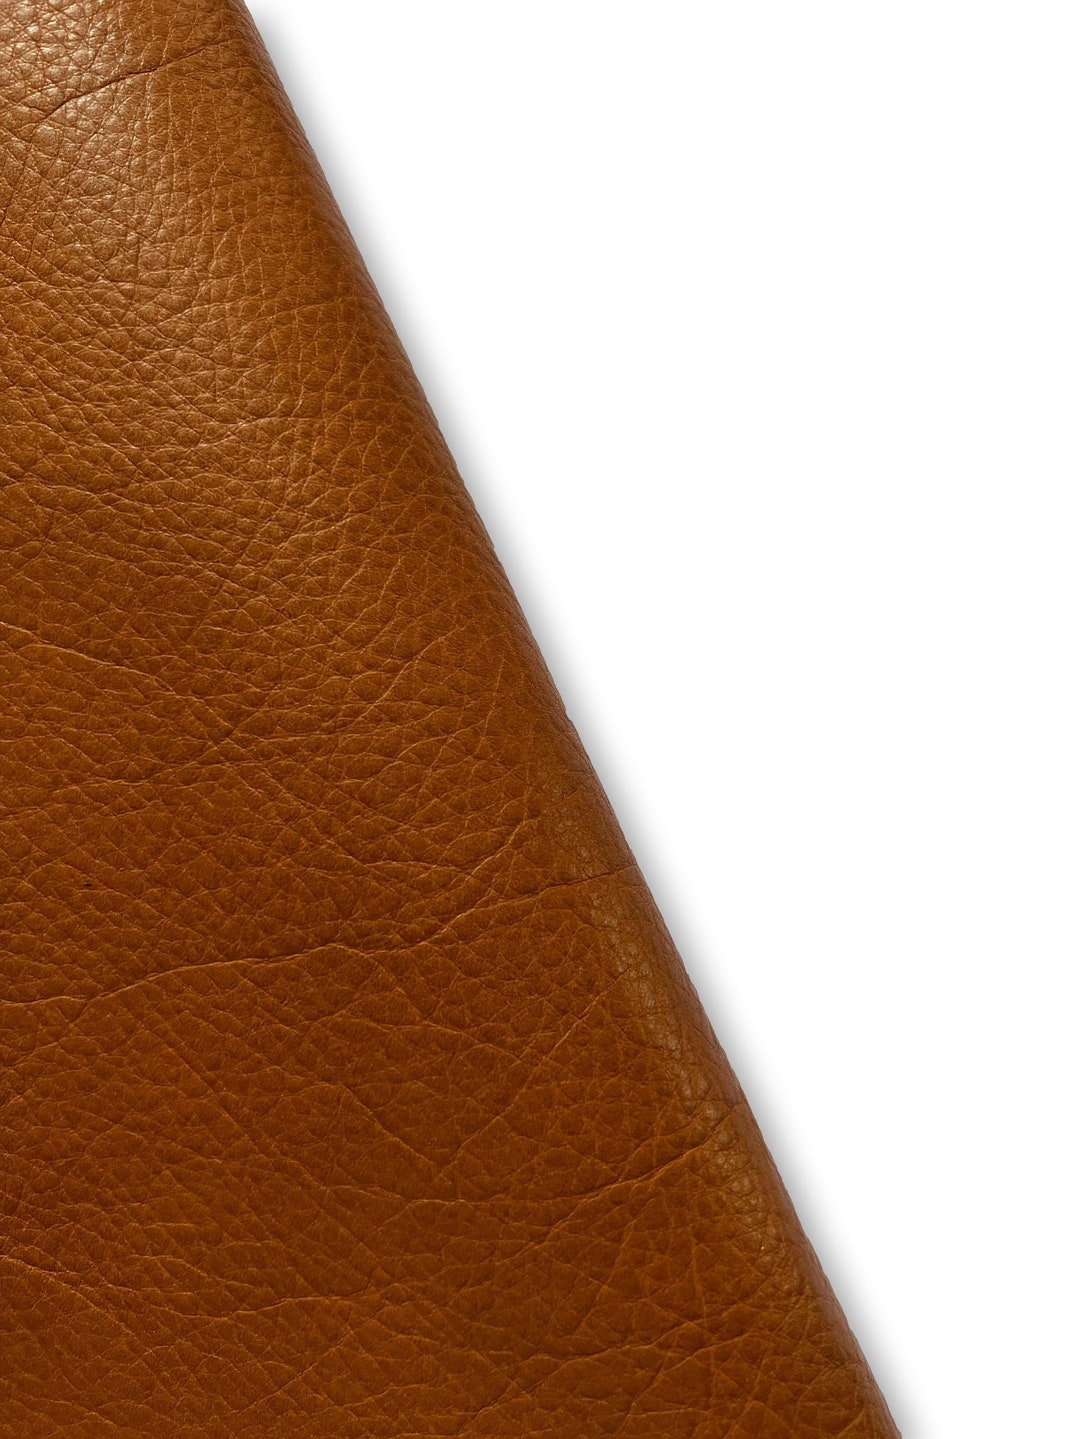 Luggage Distressed Cow Leather Whole Hide (Upholstery Leather) – TanneryNYC